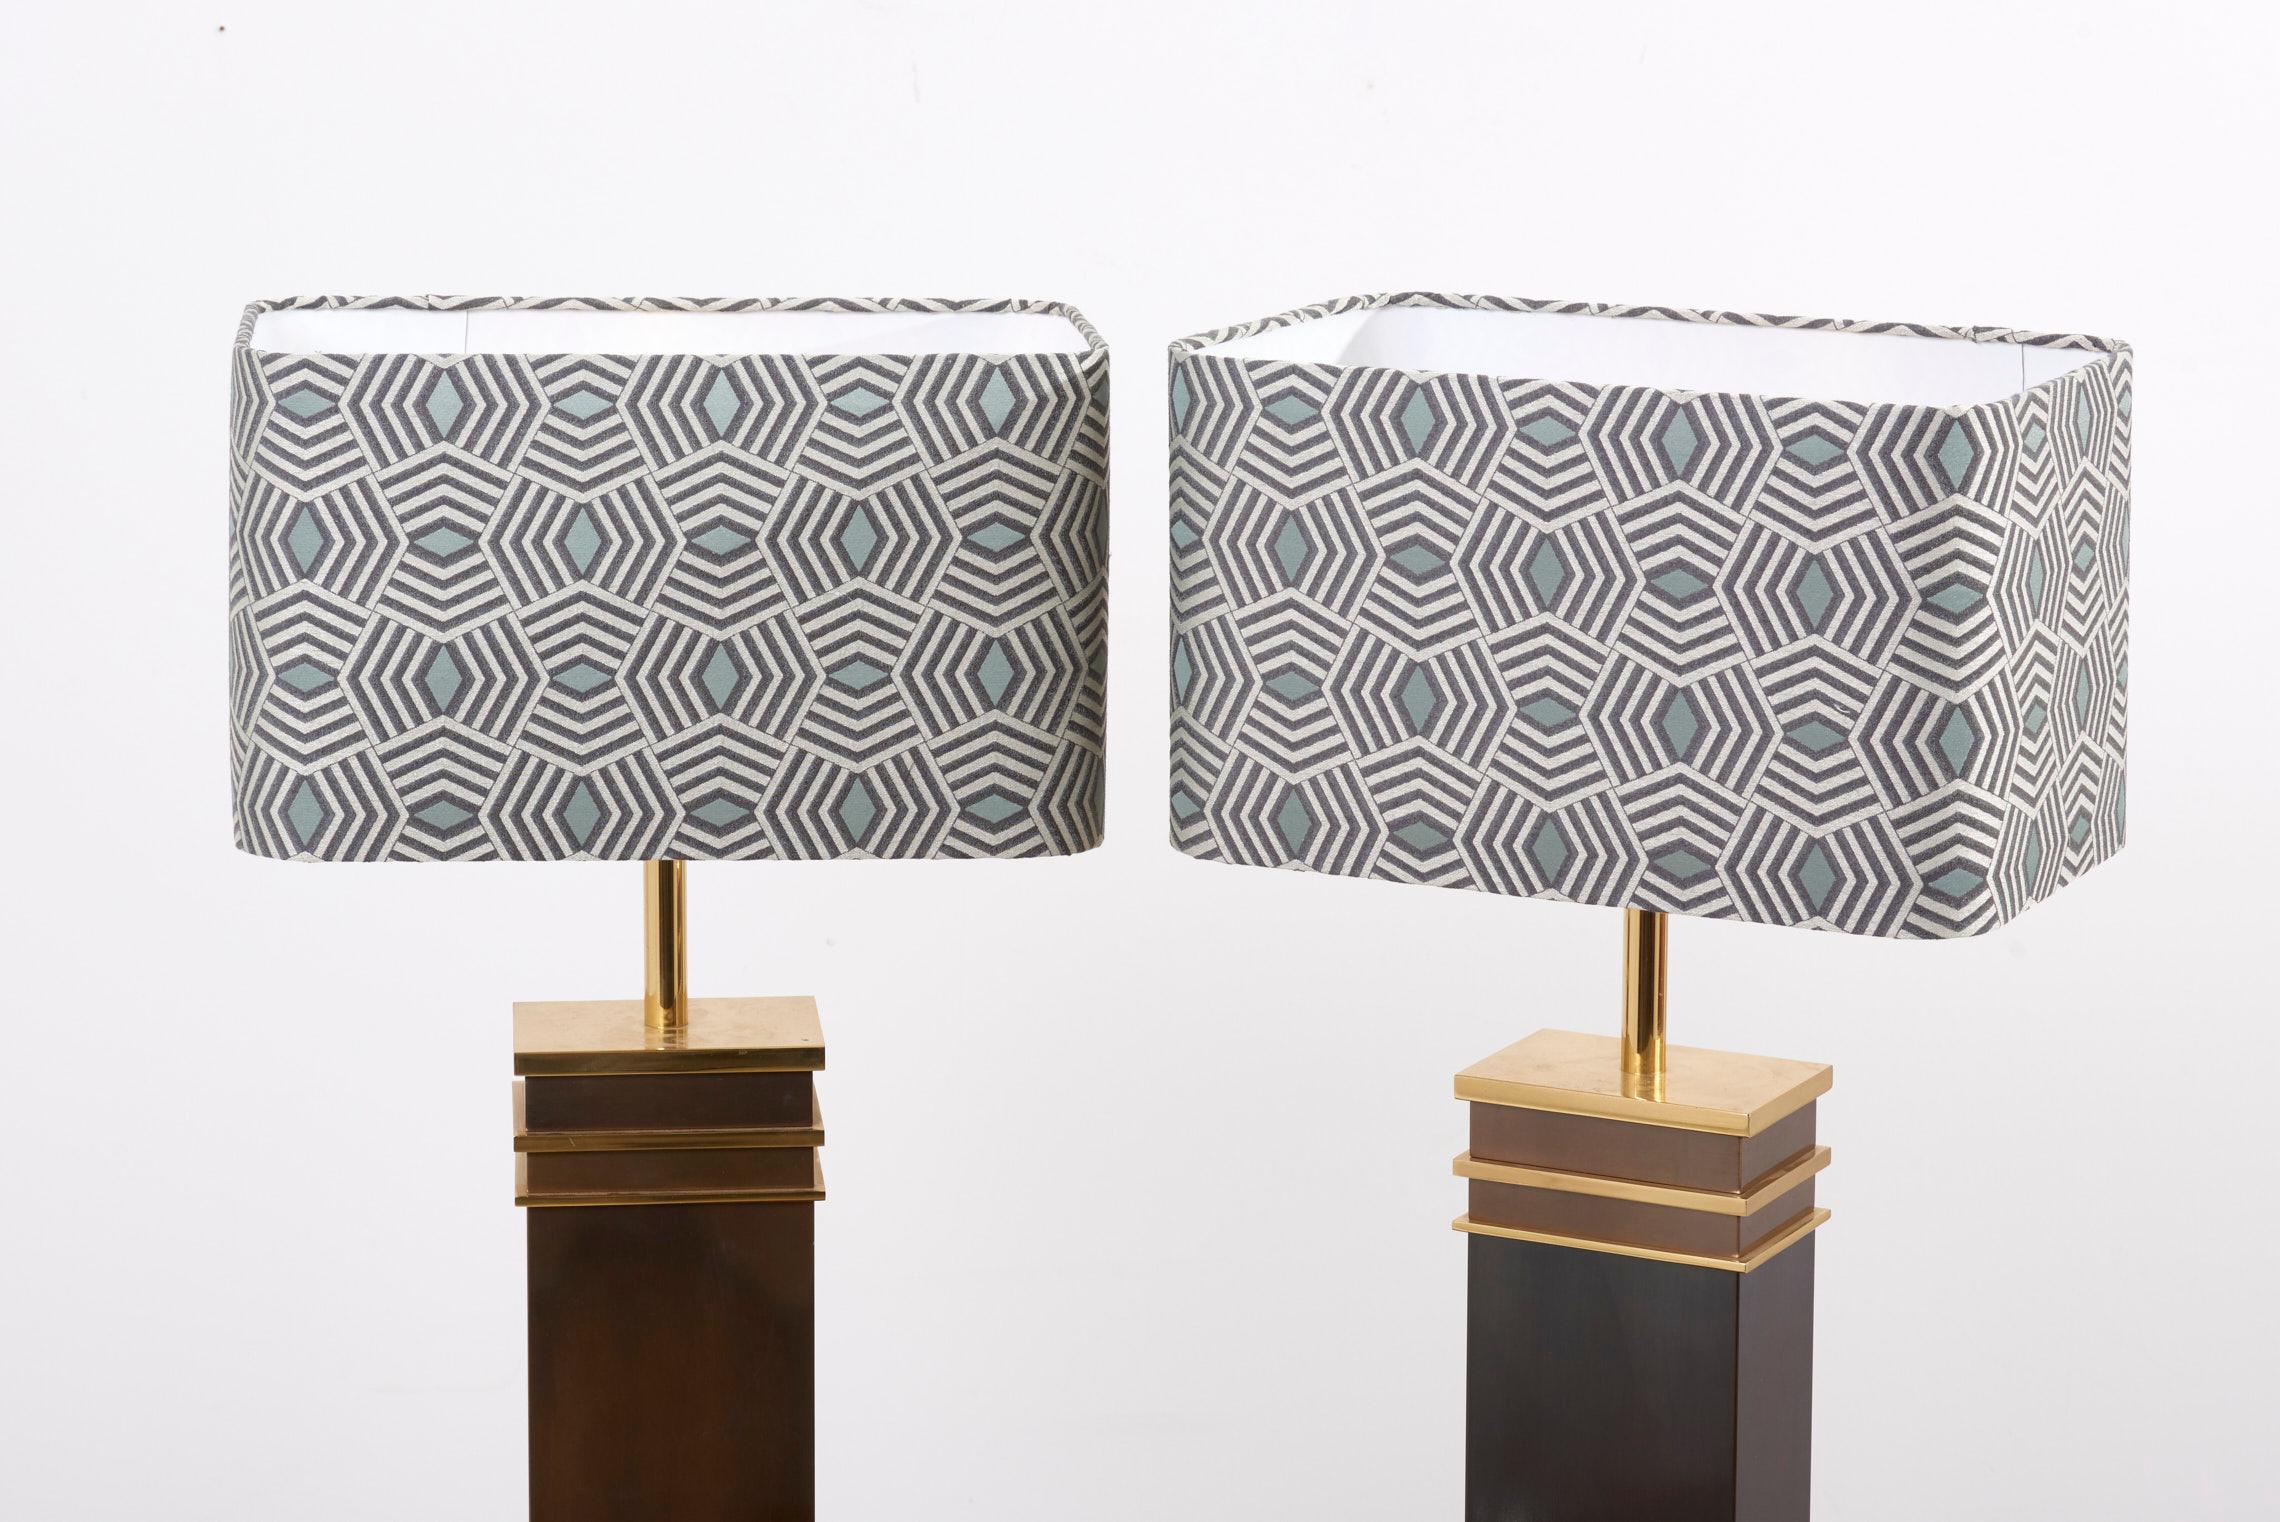 Set of two sculptural and extremely rare Mid-Century Modern table lamps in heavy, massive and partly patinated brass. Designed and manufactured by Vereinigte Werkstätten in Germany - 1960s. Including new custom made lamp shades with a graphic